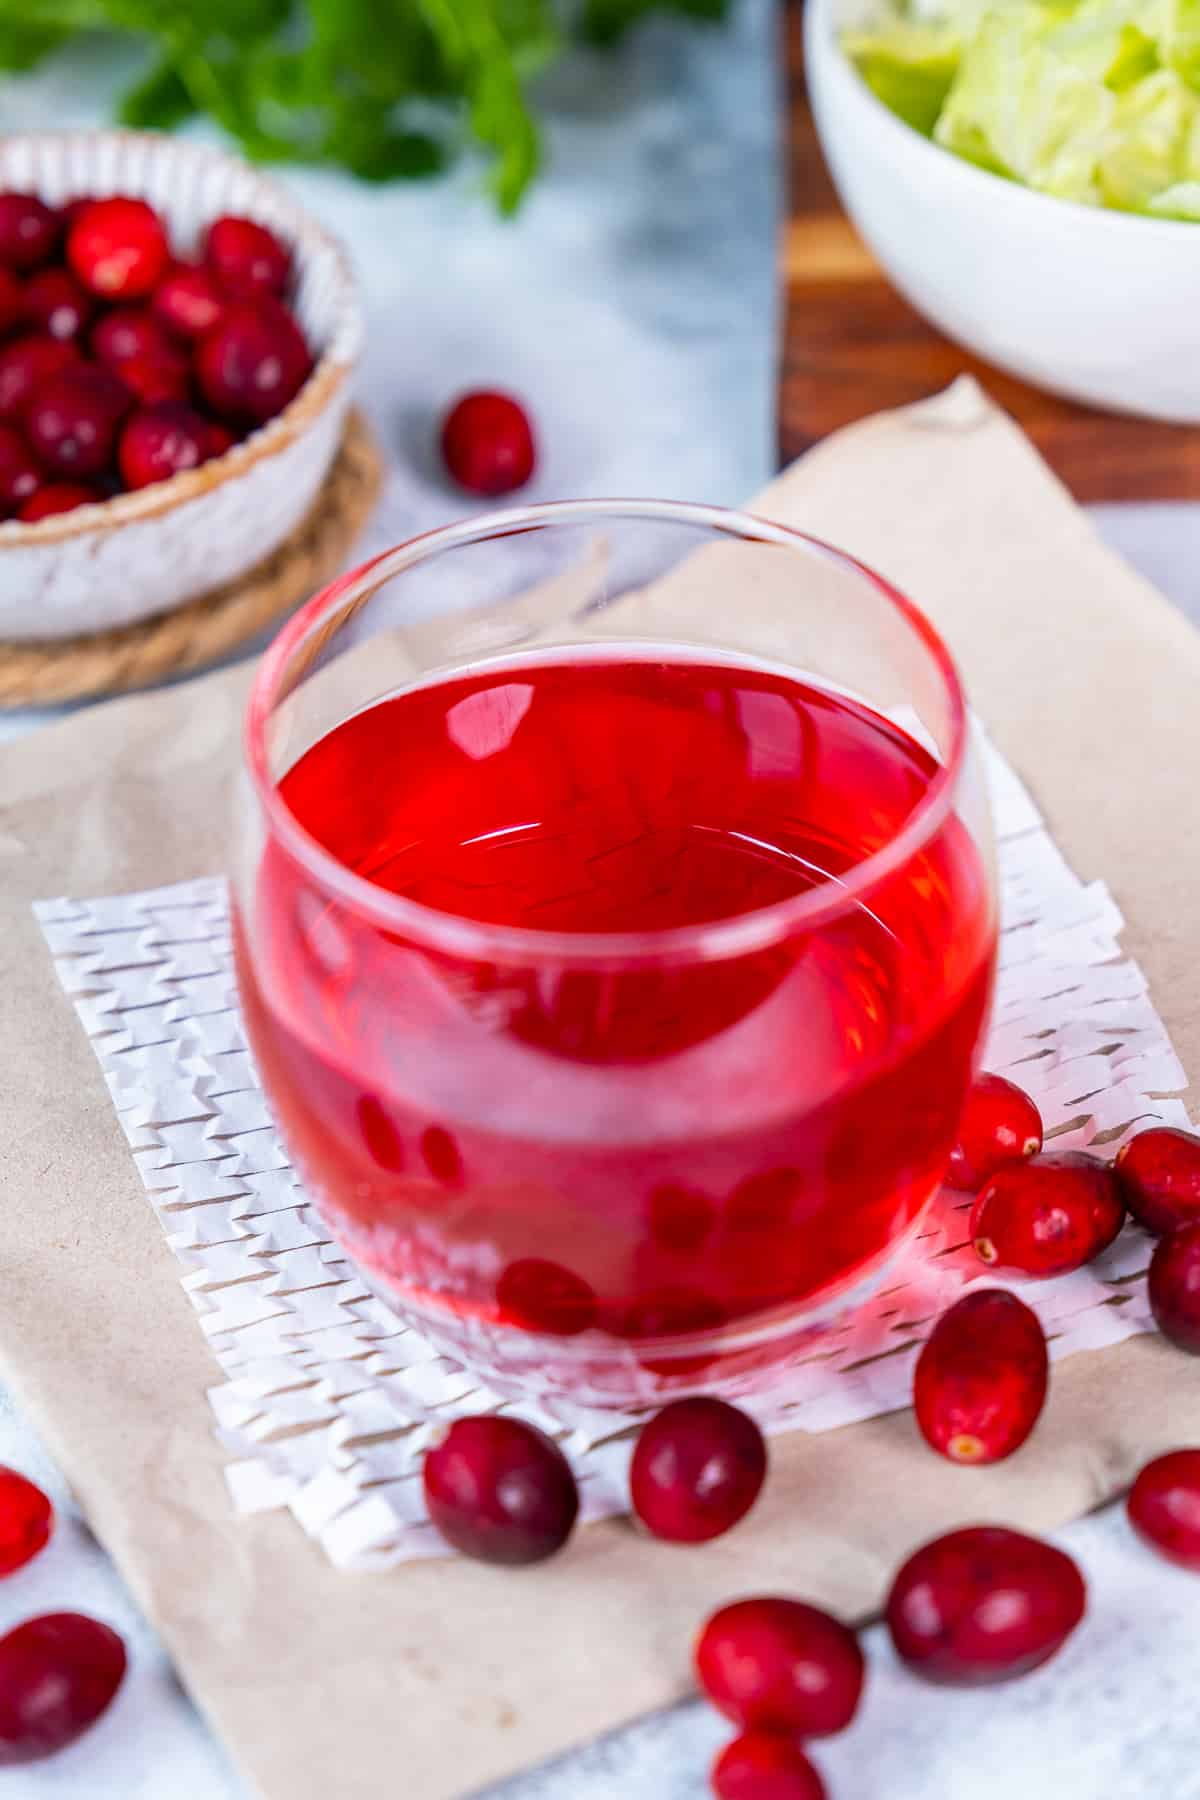 A glass of cranberry juice and fresh cranberries around it.